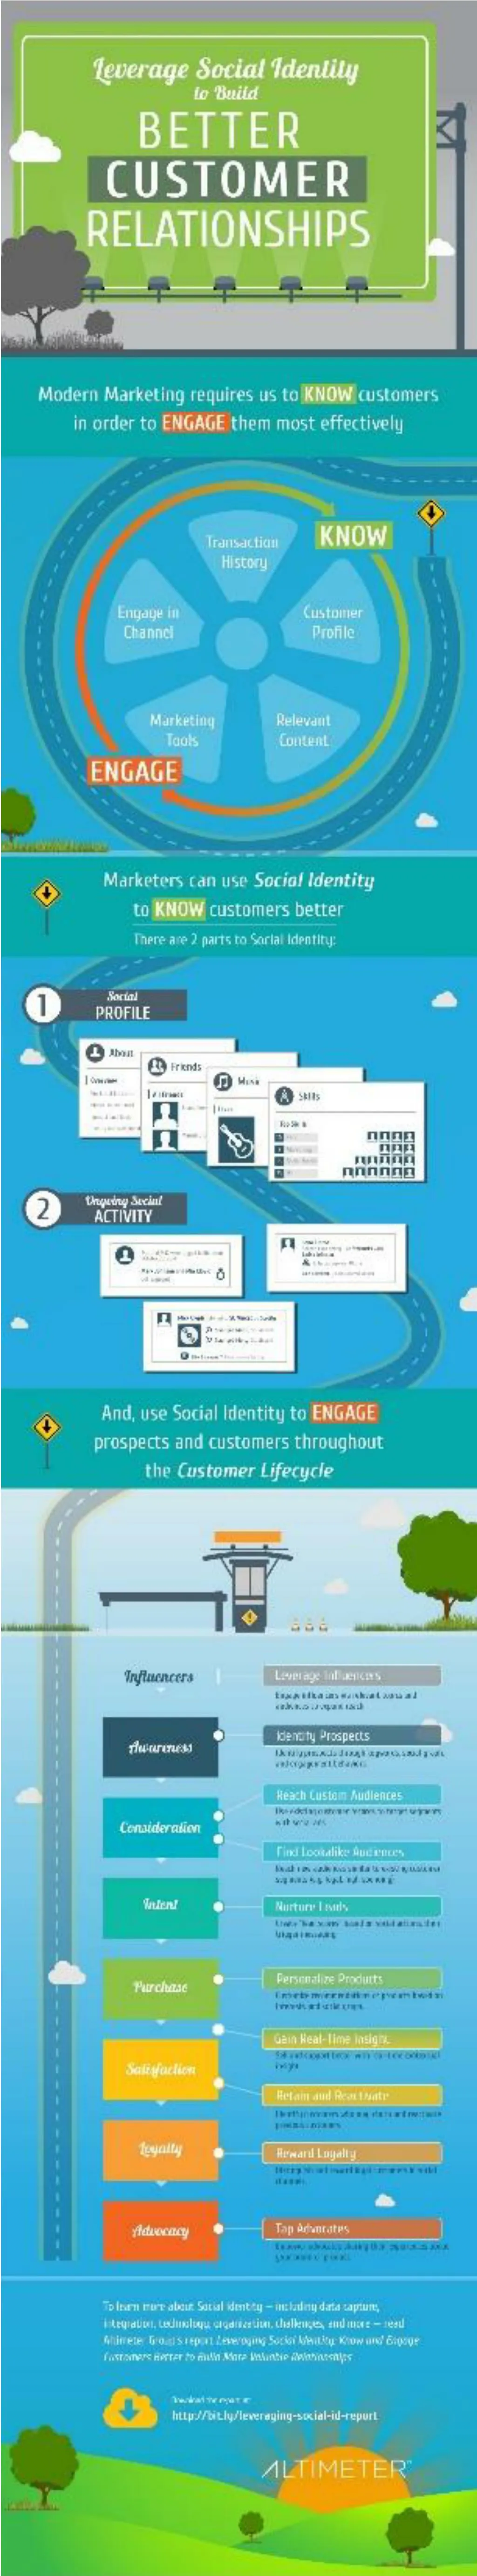 infographic leverage social identity to build